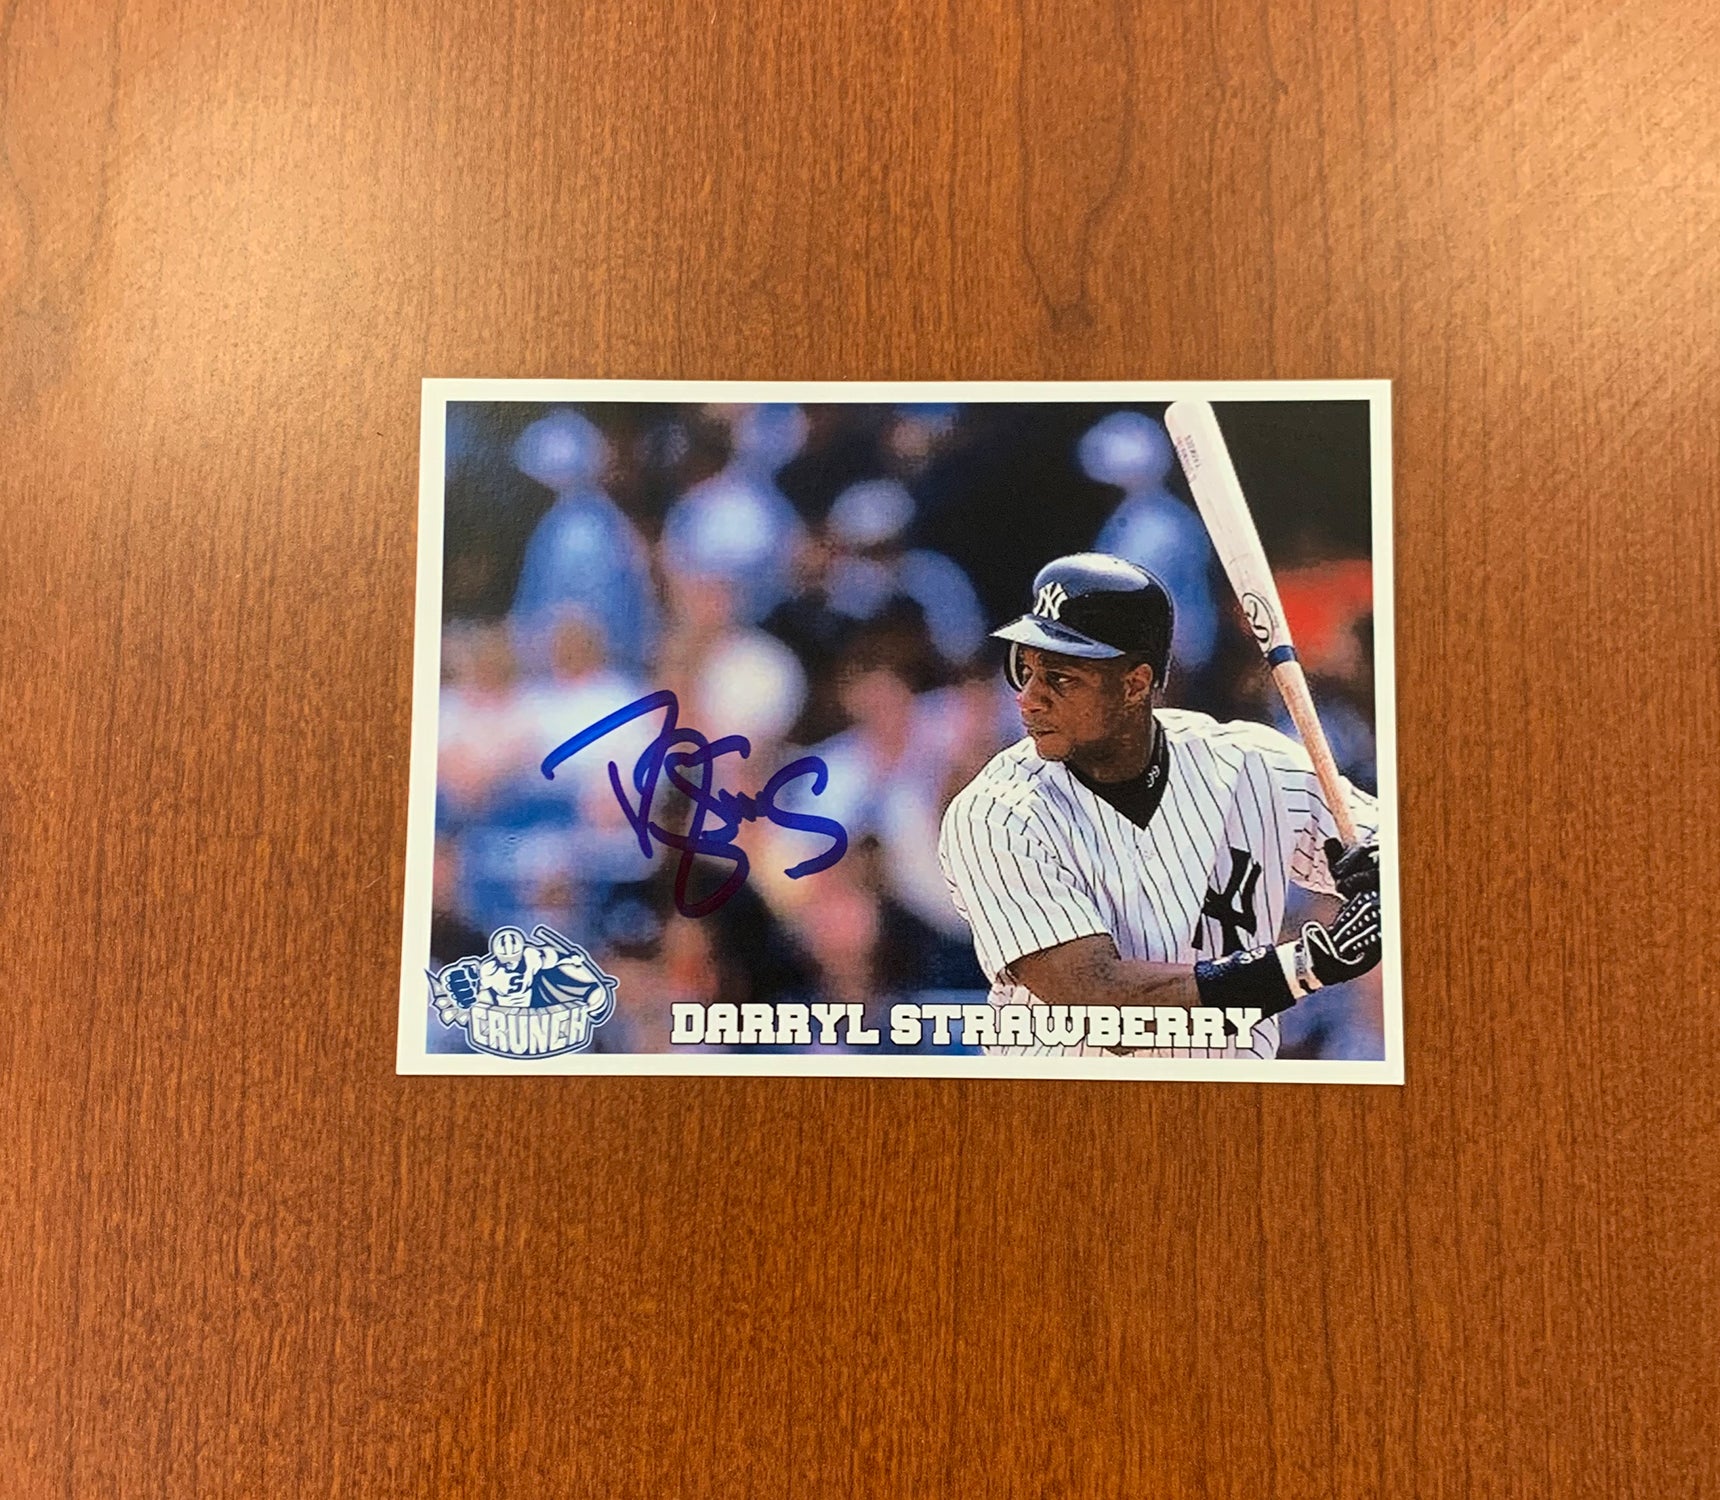 Darryl Strawberry Autographed Photo – Syracuse Crunch Official